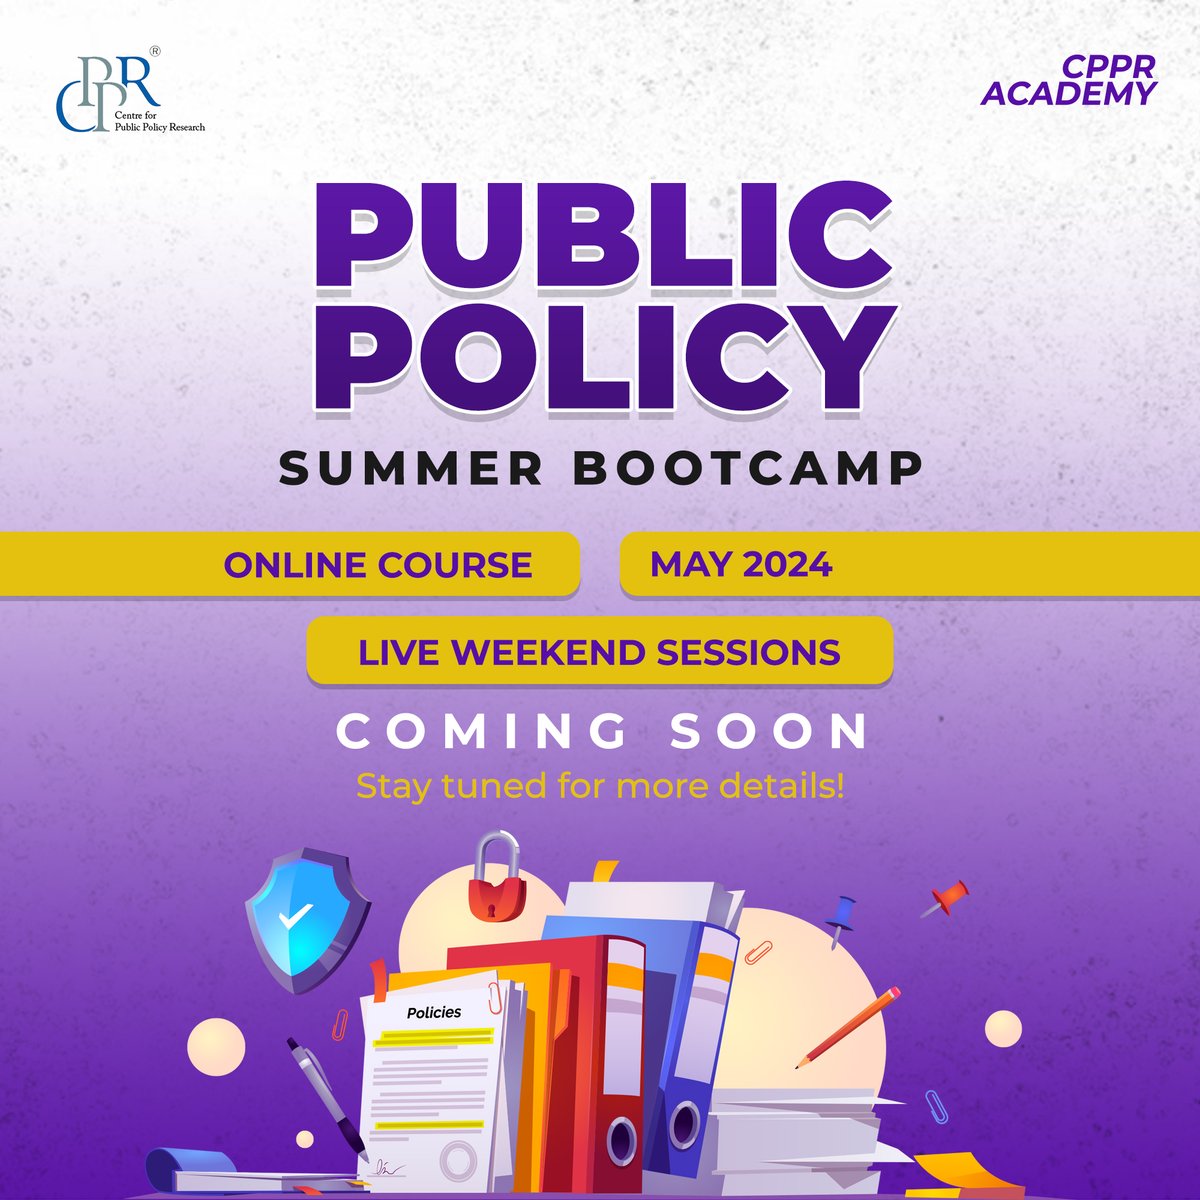 Make the most of this Summer Break with CPPR Academy's Public Policy Summer BootCamp!!

Keep an eye here for More Details!

#onlinecourse #publicpolicy #summertime #cpprAcademy